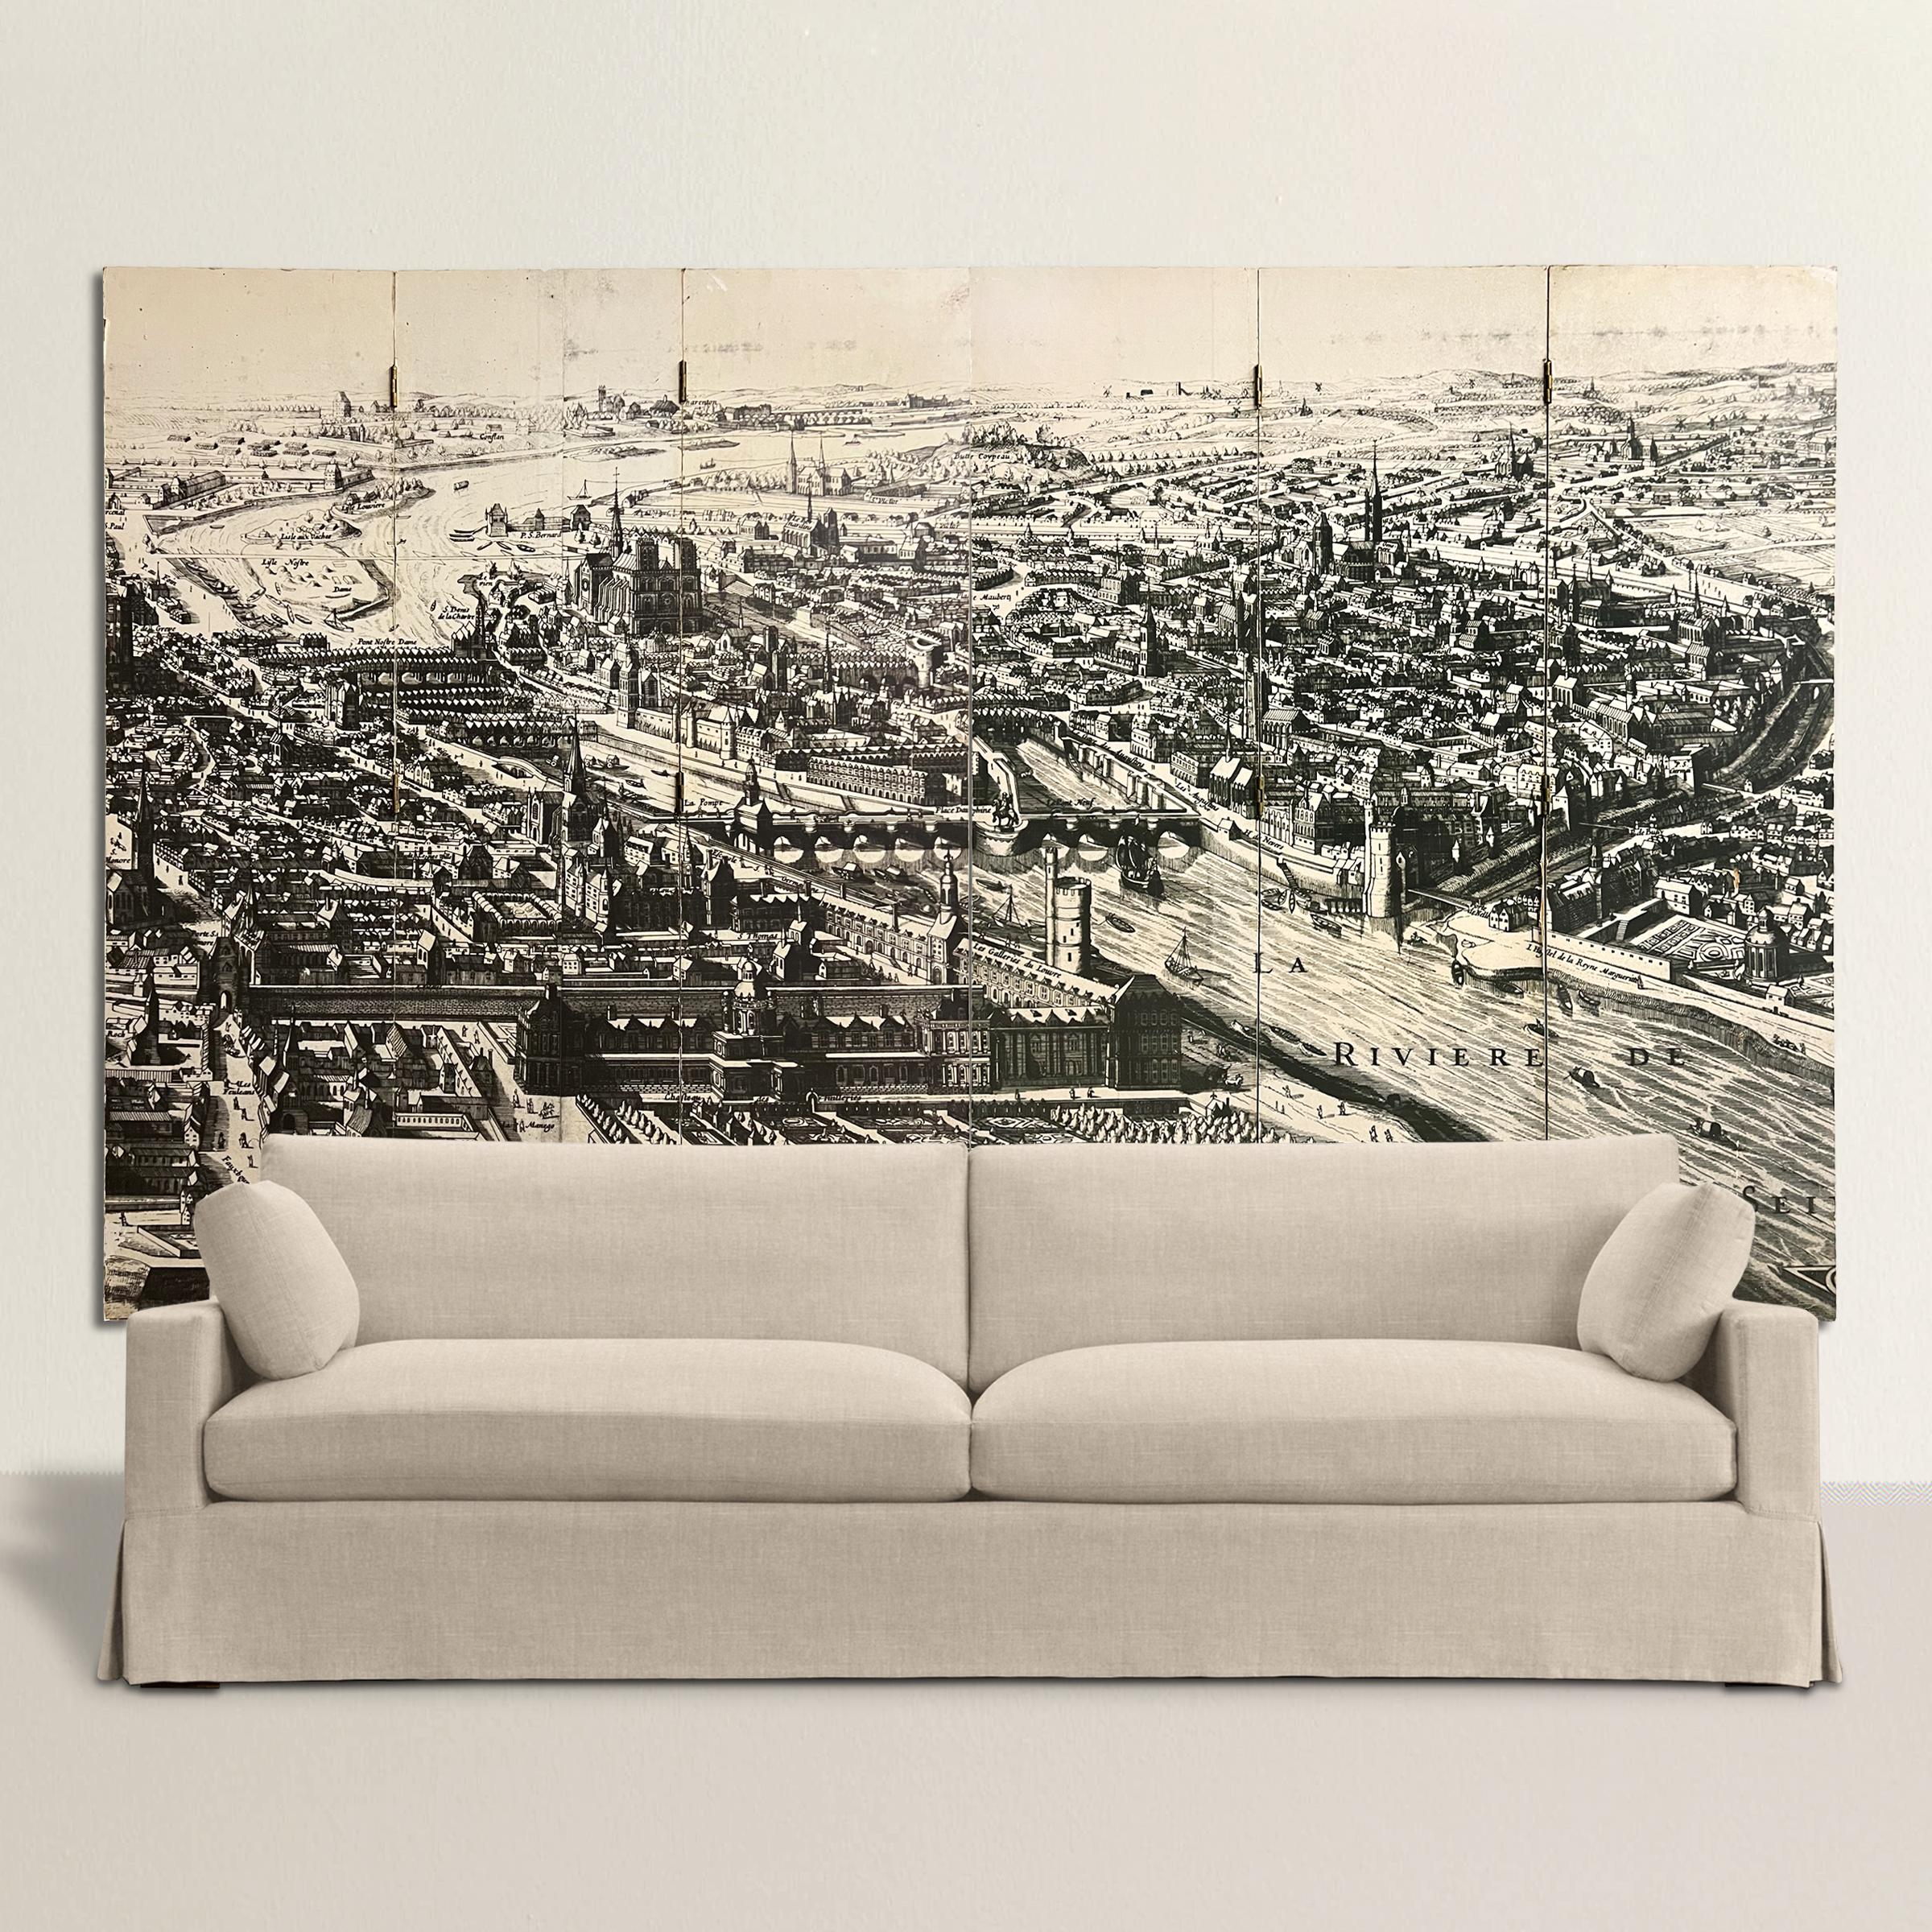 Transport yourself to the enchanting streets of 18th century Paris with this pair of vintage French folding screens that come together to form an exquisite aerial map of the city. Executed in a style reminiscent of Fornasetti, these screens